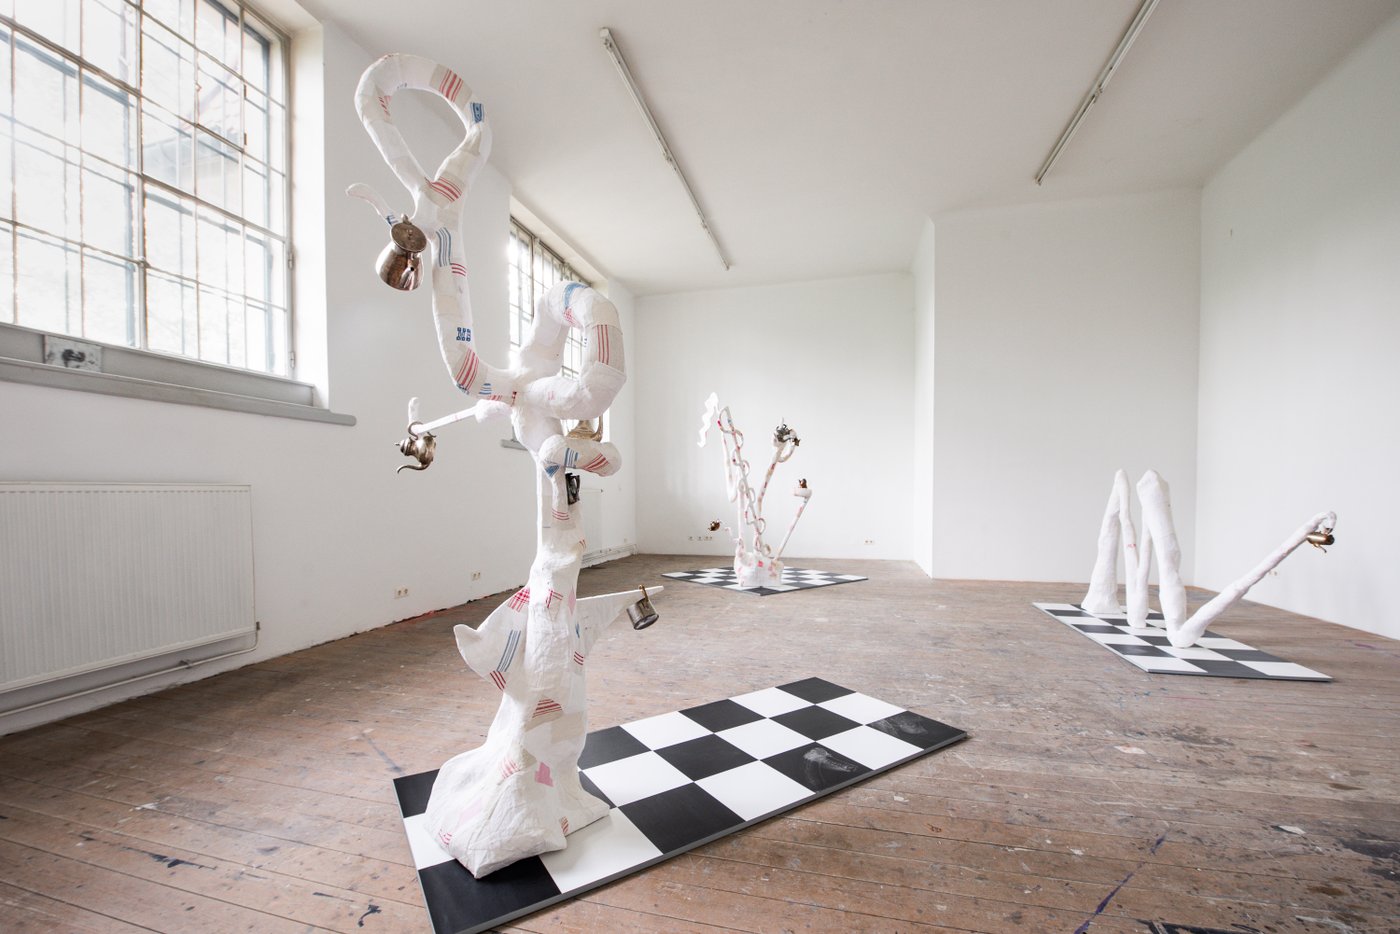 three tendril-like white plaster figures in which teapots hang, on black and white checkered surfaces